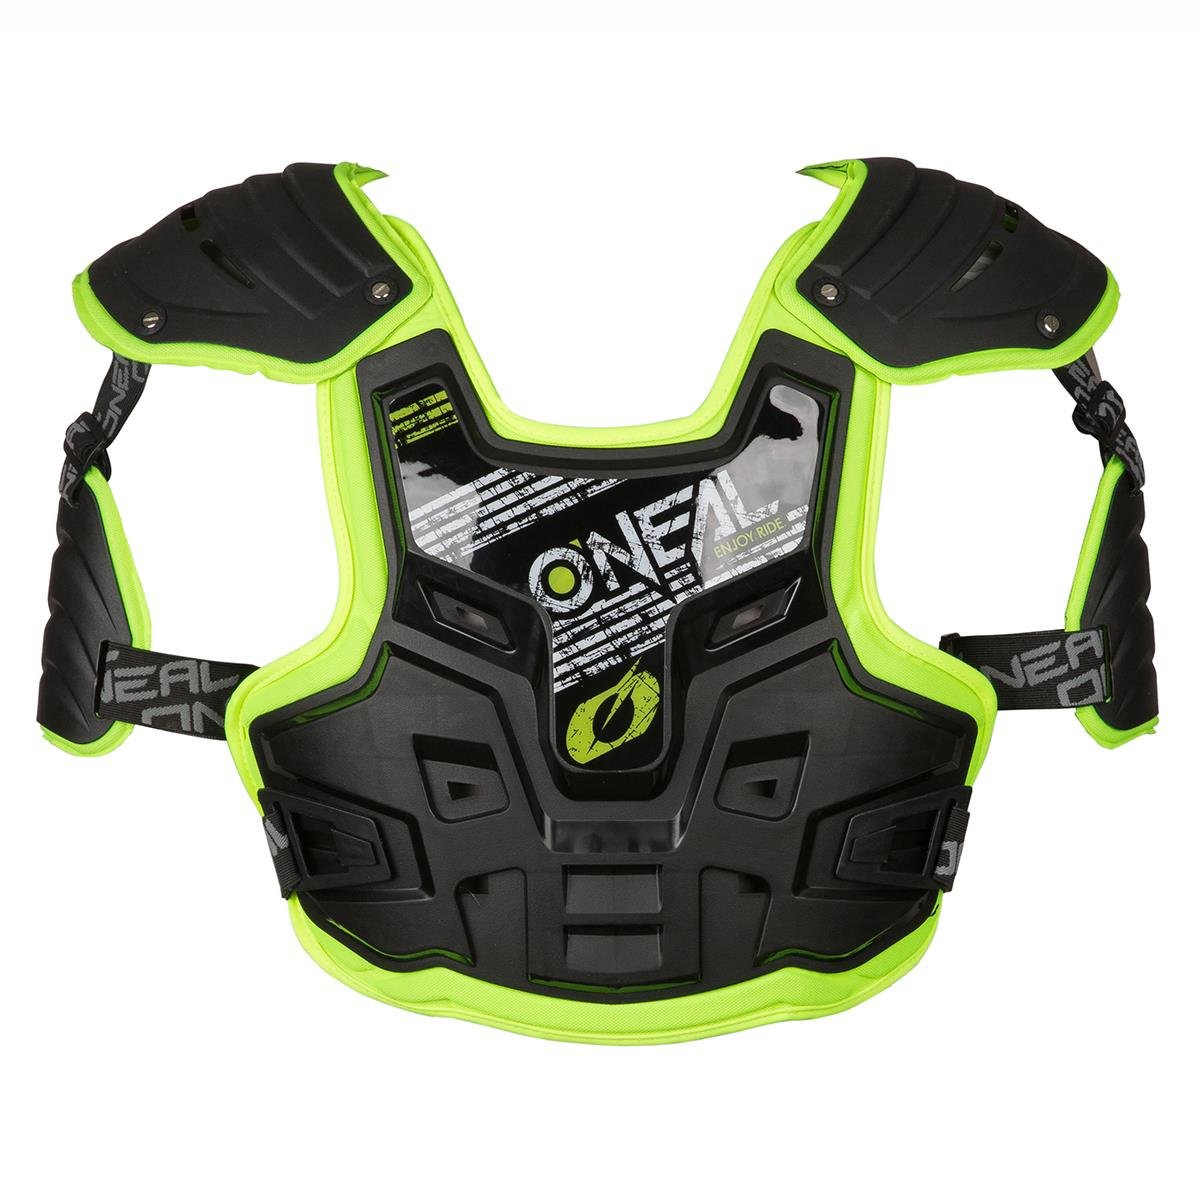 O'Neal Unisex-Adult Chest Protector Black, One Size 